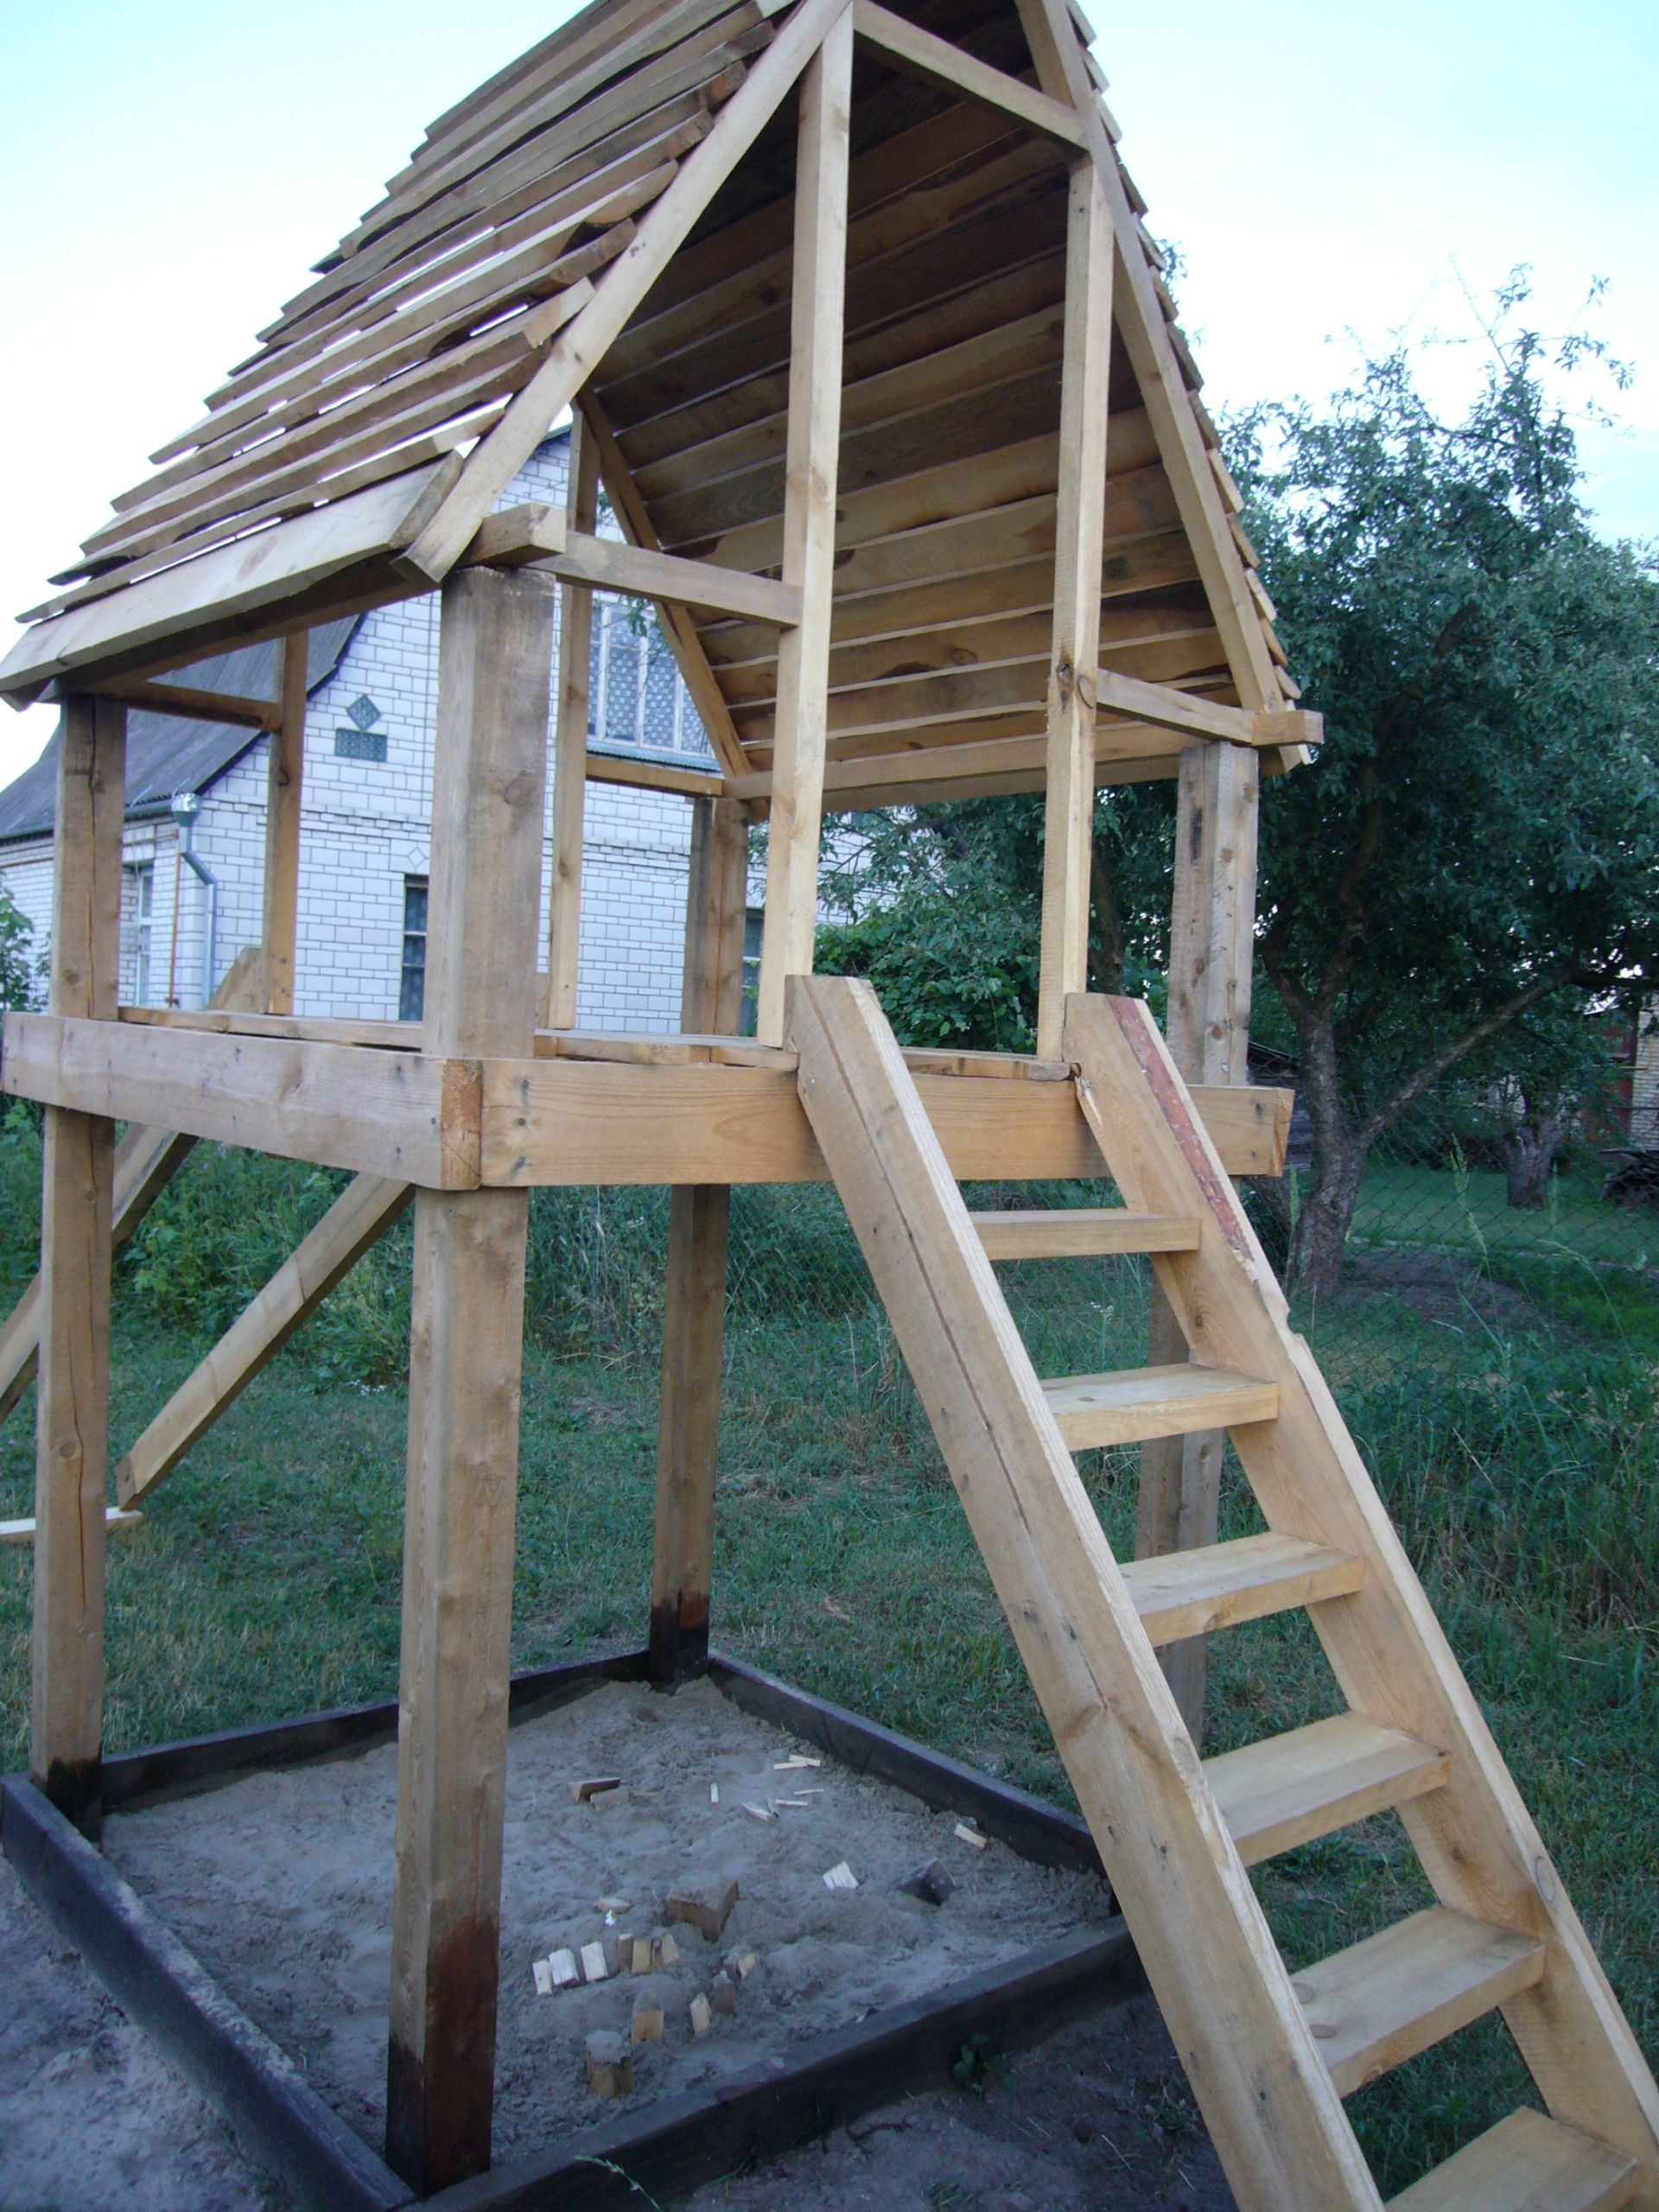 DIY Wooden Playhouse
 DIY project wood playhouse with slide